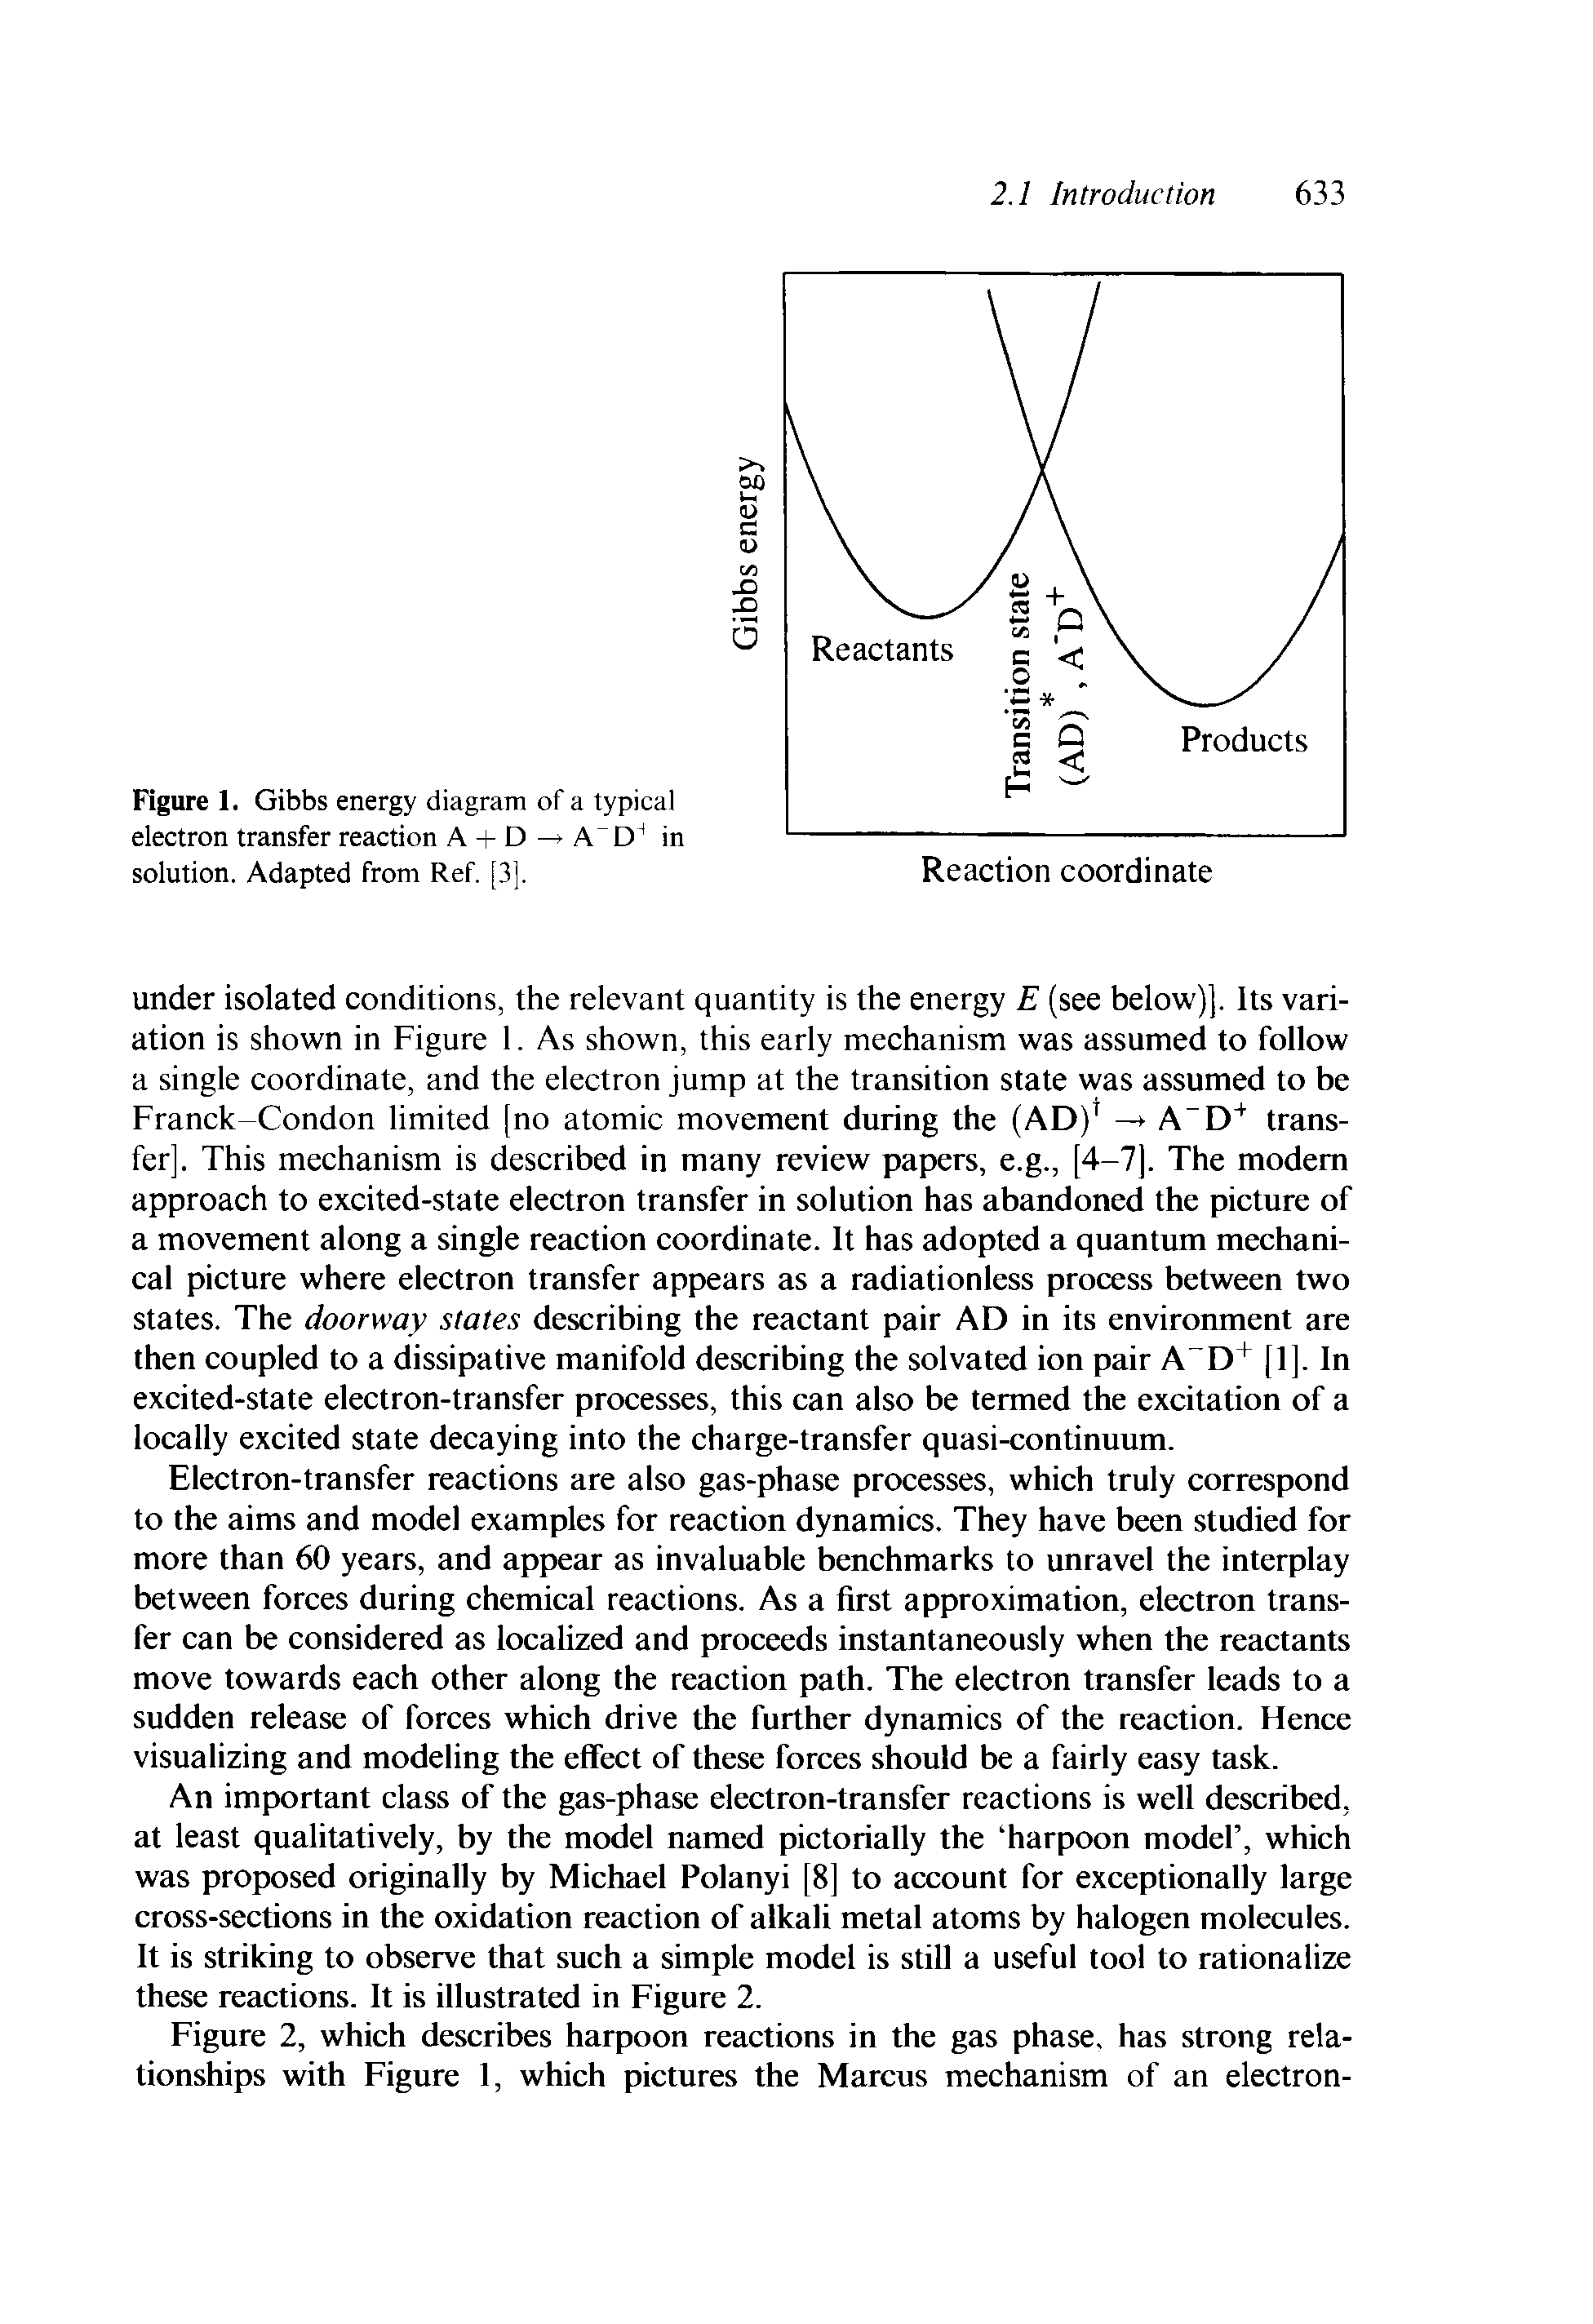 Figure 1. Gibbs energy diagram electron transfer reaction A + D solution. Adapted from Ref. [3].